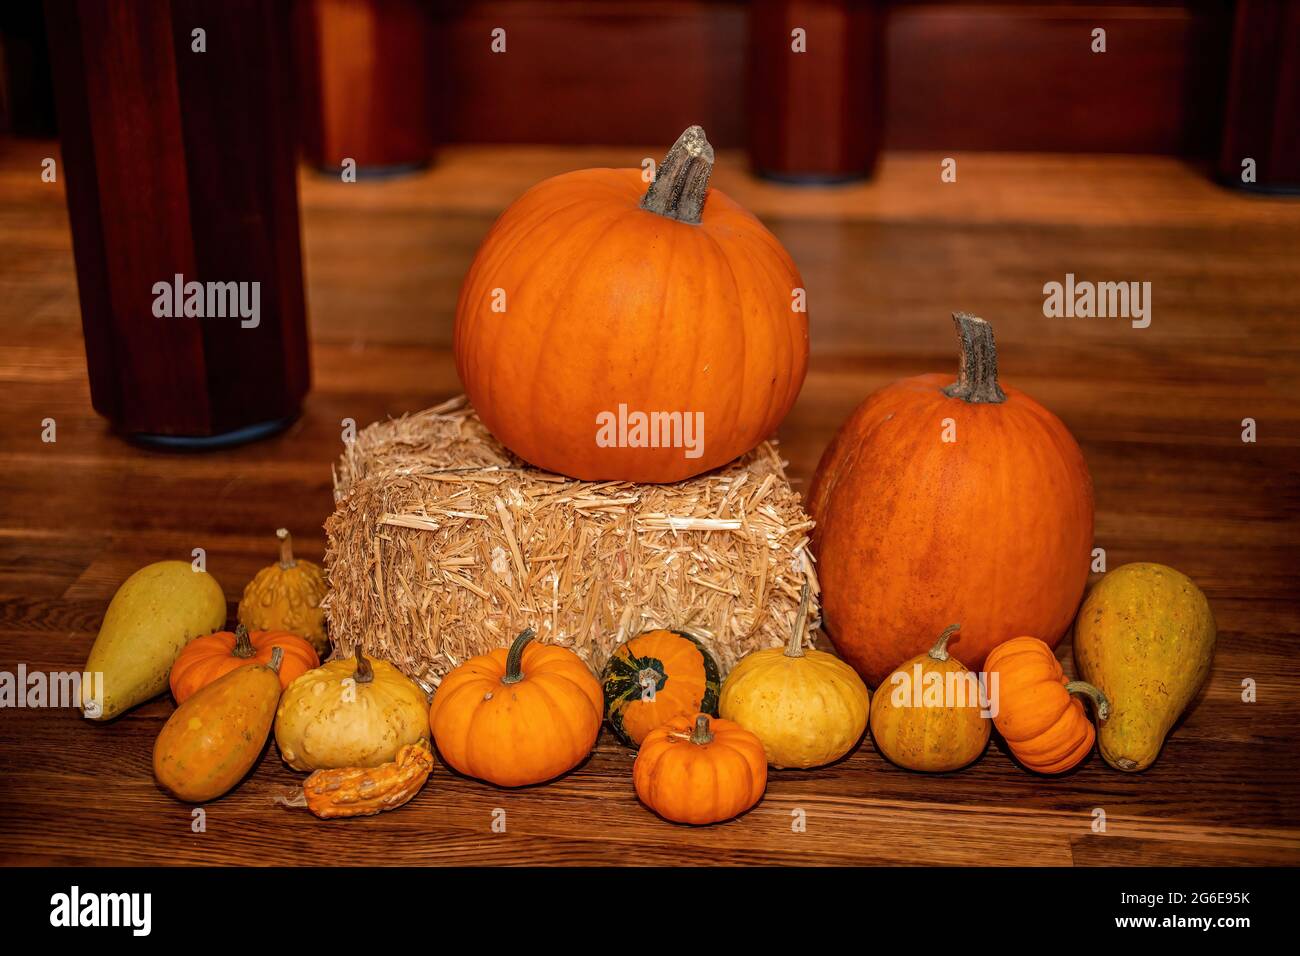 Pumpkin and gourds decoration for a fall display of a bountiful harvest. Stock Photo